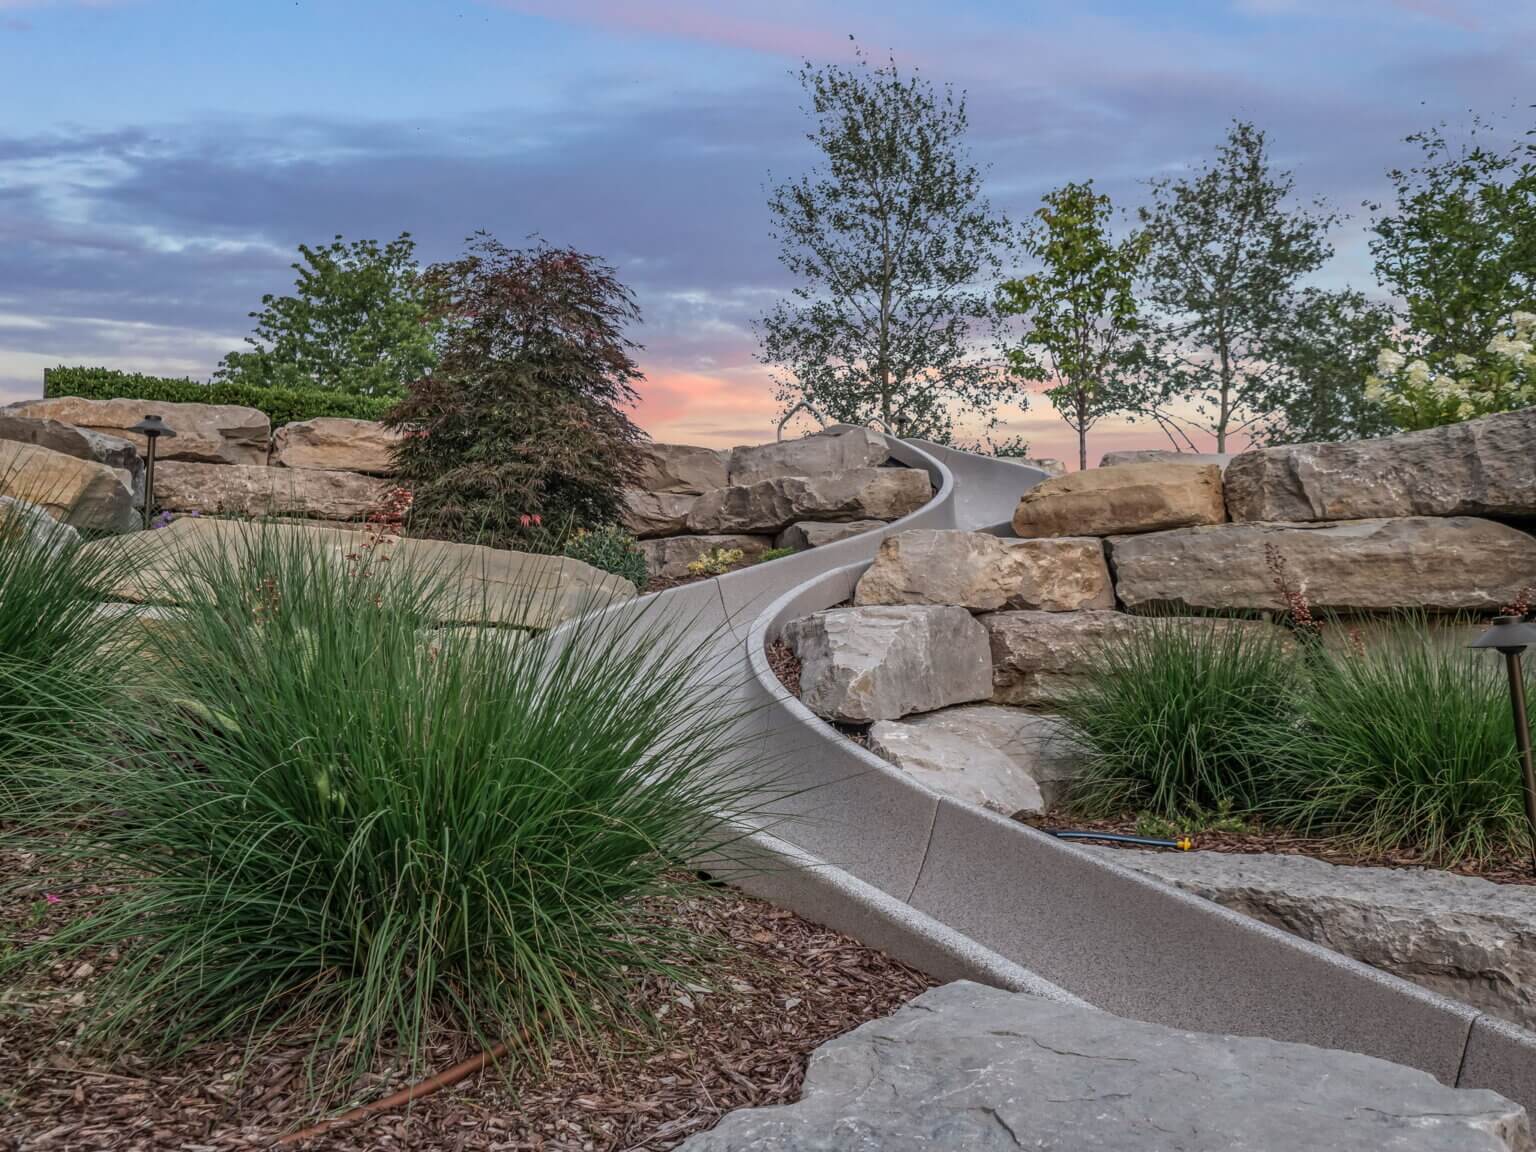 land scaping services landscaping rochester hills mi landscaping & construction pool and landscape contractors lawn landscaping near me patio and landscaping companies near me landscape installation companies near me land scaping near me landscaping and pool installation patio landscaping companies near me pool installation and landscaping top ten landscaping companies near me outdoor landscape contractors pool and landscape contractors near me pool and landscaping companies near me landscaping stone work near me pool and hardscape contractors near me pool slide